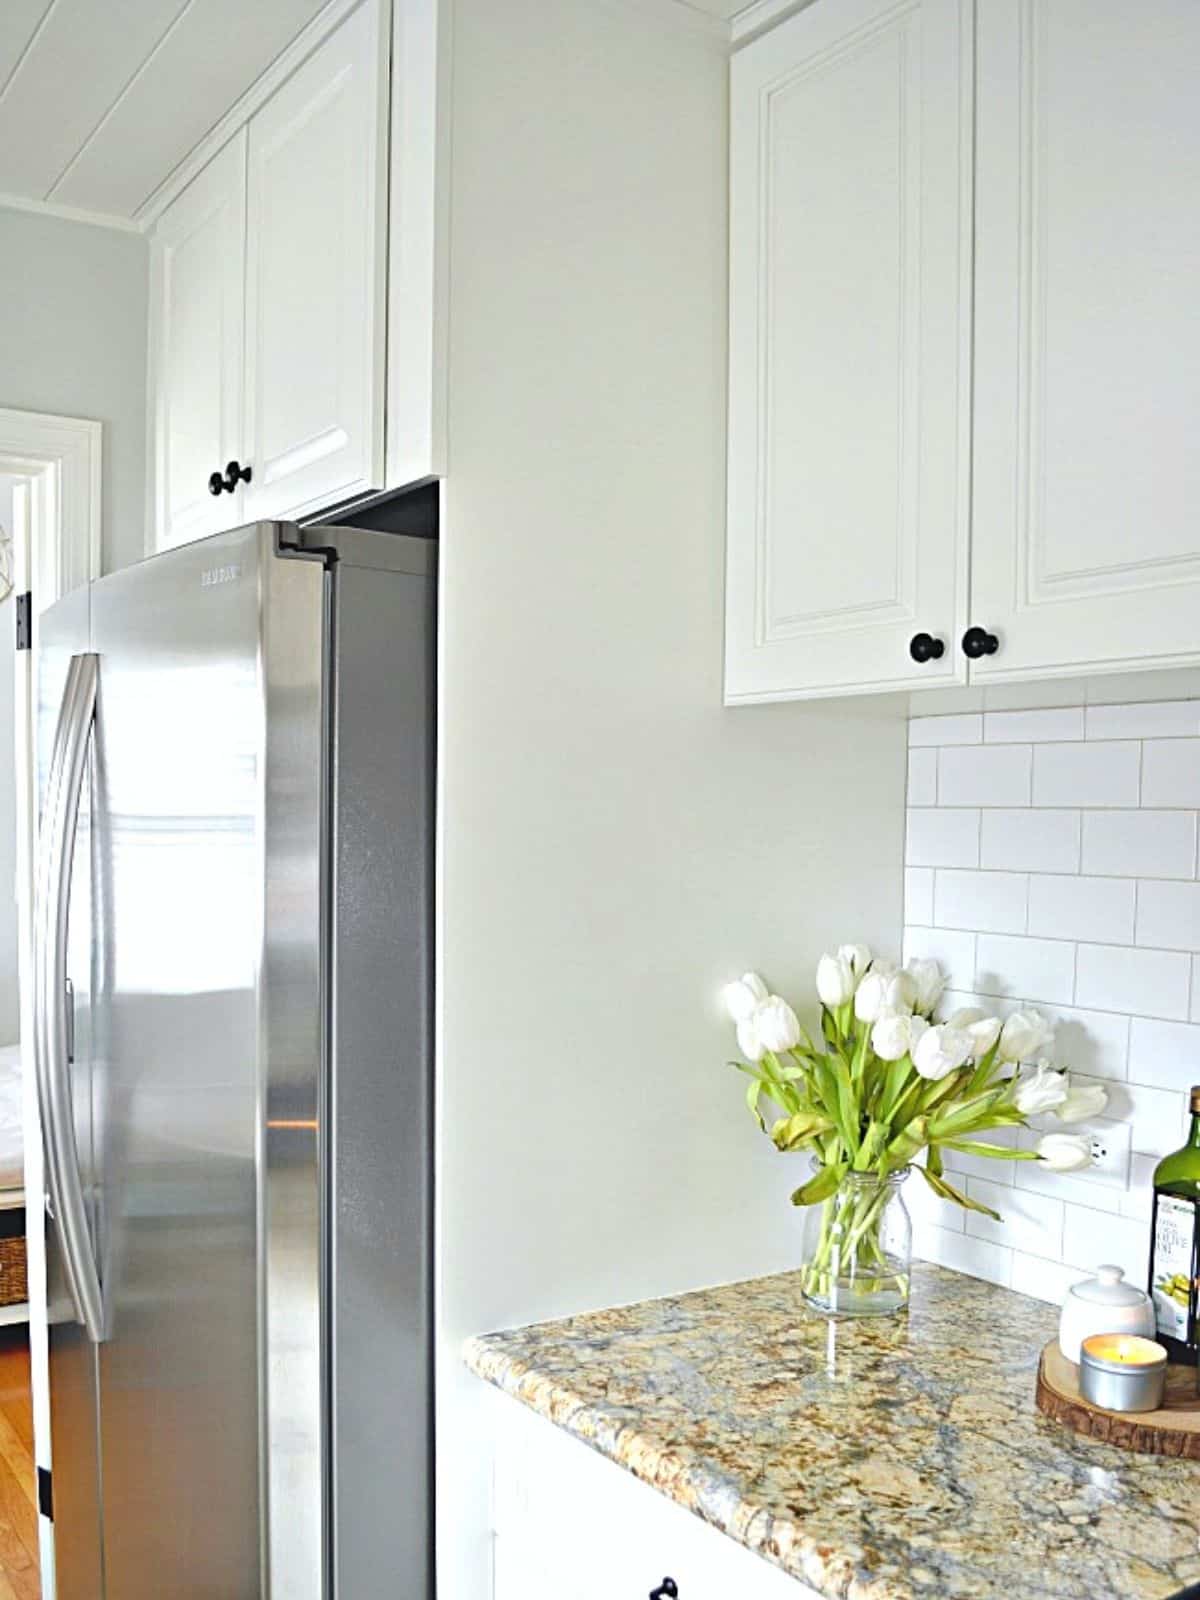 painted white cabinet built around stainless steel refrigerator